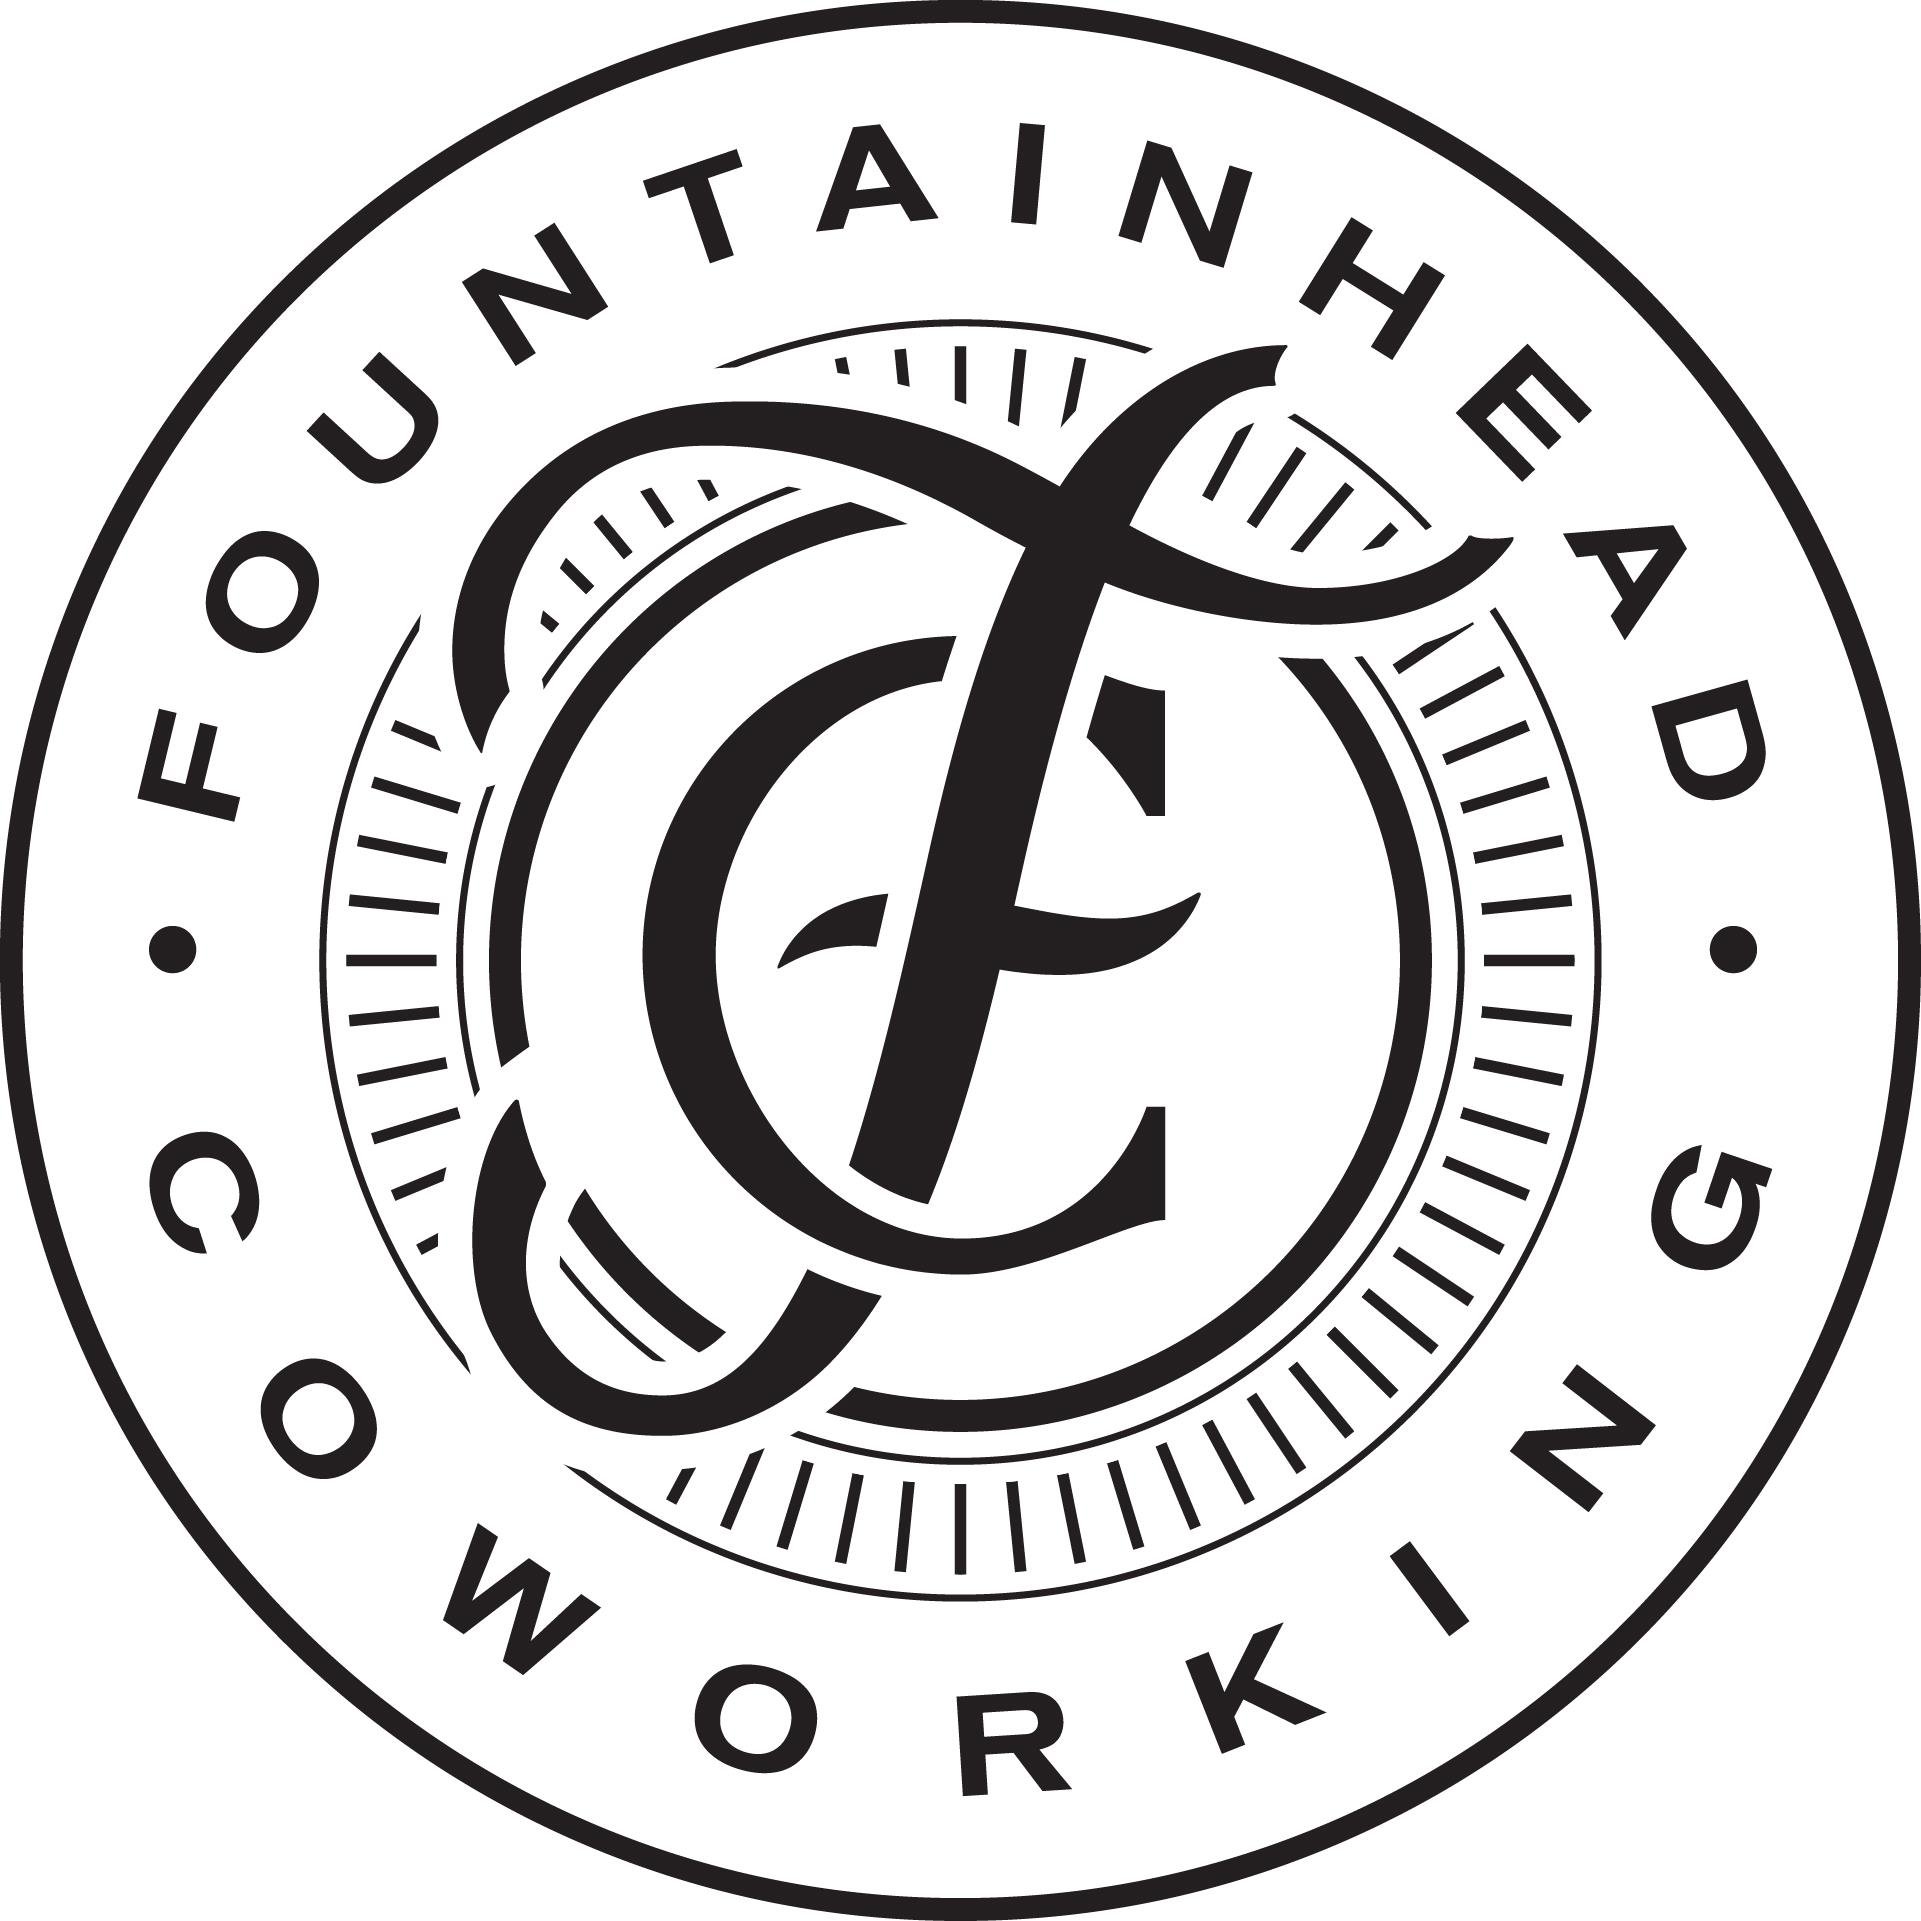 Coworking space, business center and superhero headquarters located in Butte, Montana!